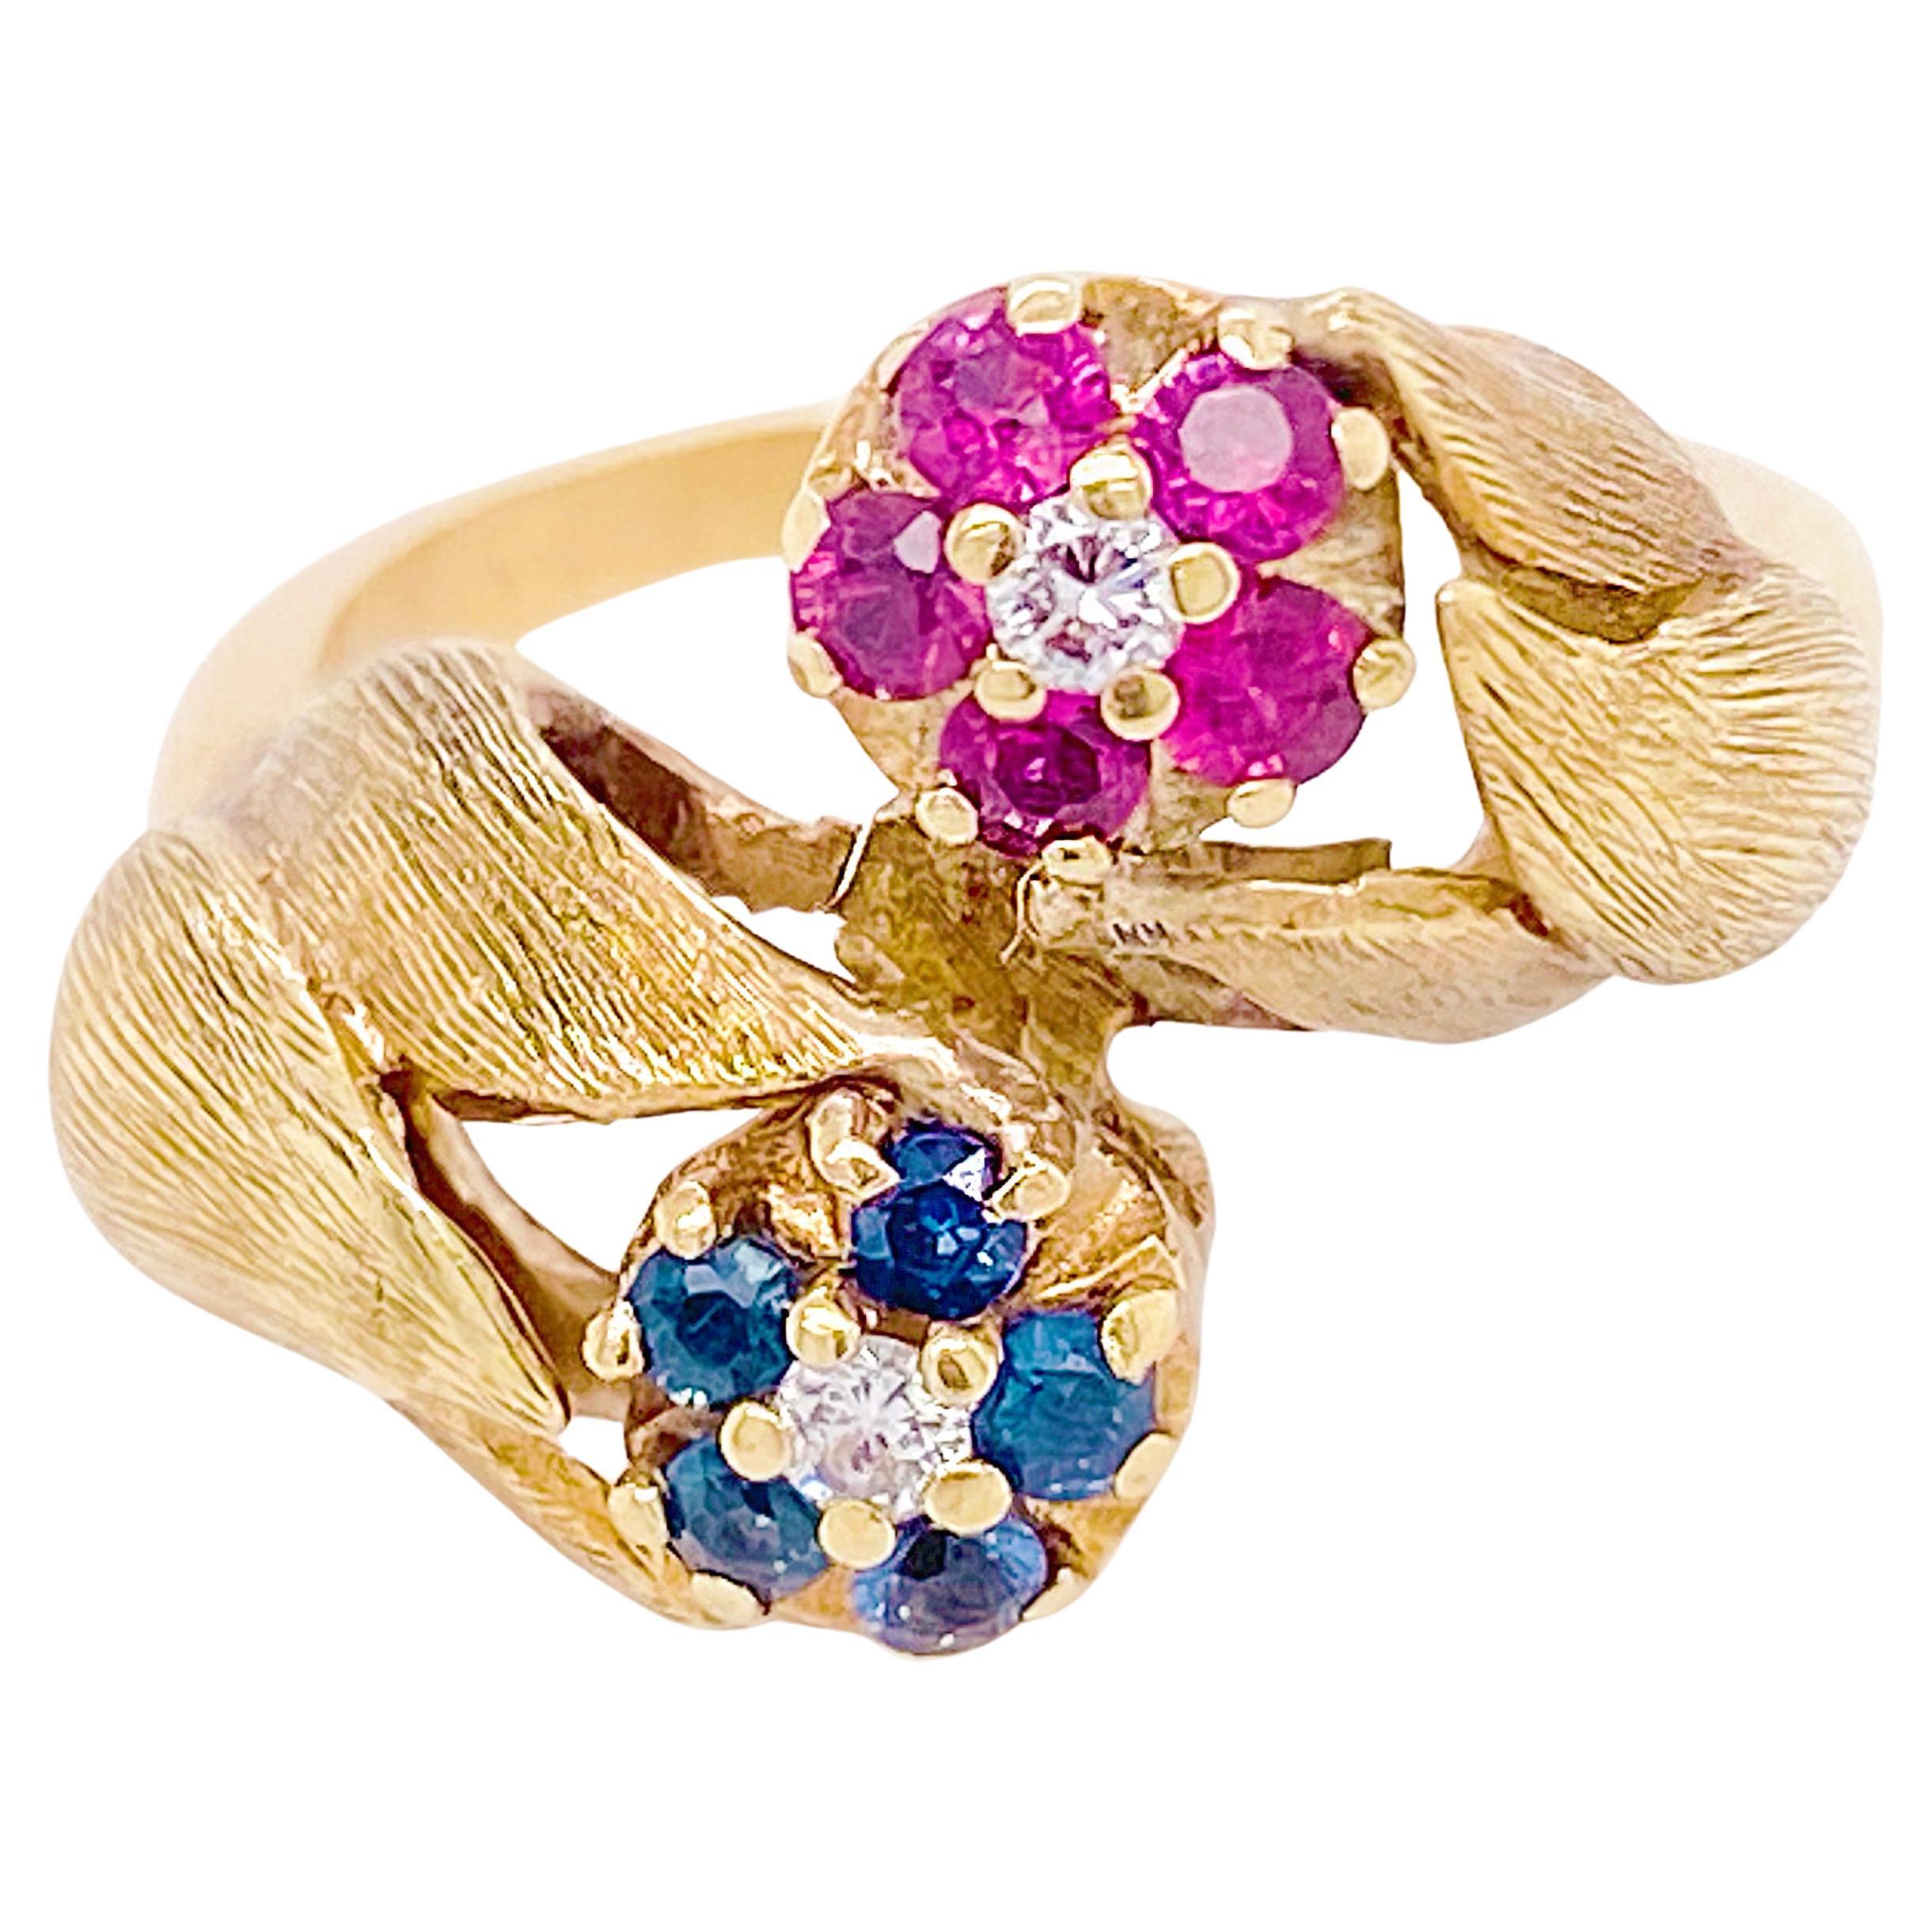 Vintage Double Tulip Ring w Rubies Sapphires & Diamonds Round Clusters in Gold